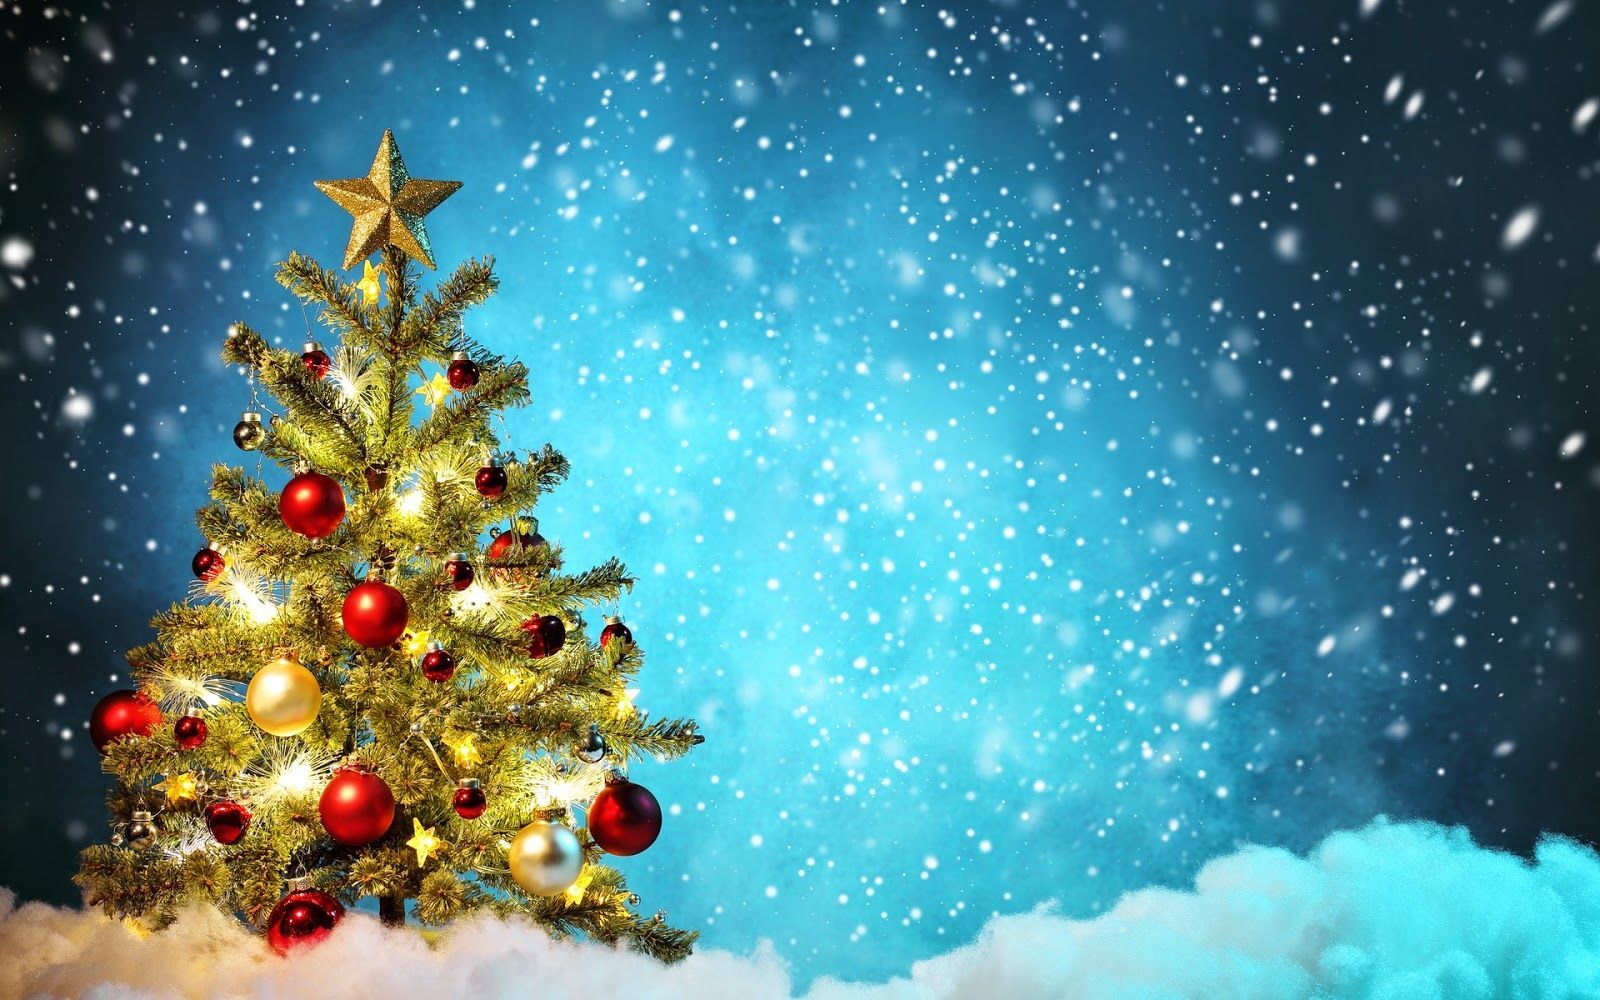 Merry Christmas Picture. Christmas tree wallpaper, Christmas wallpaper hd, Christmas desktop wallpaper